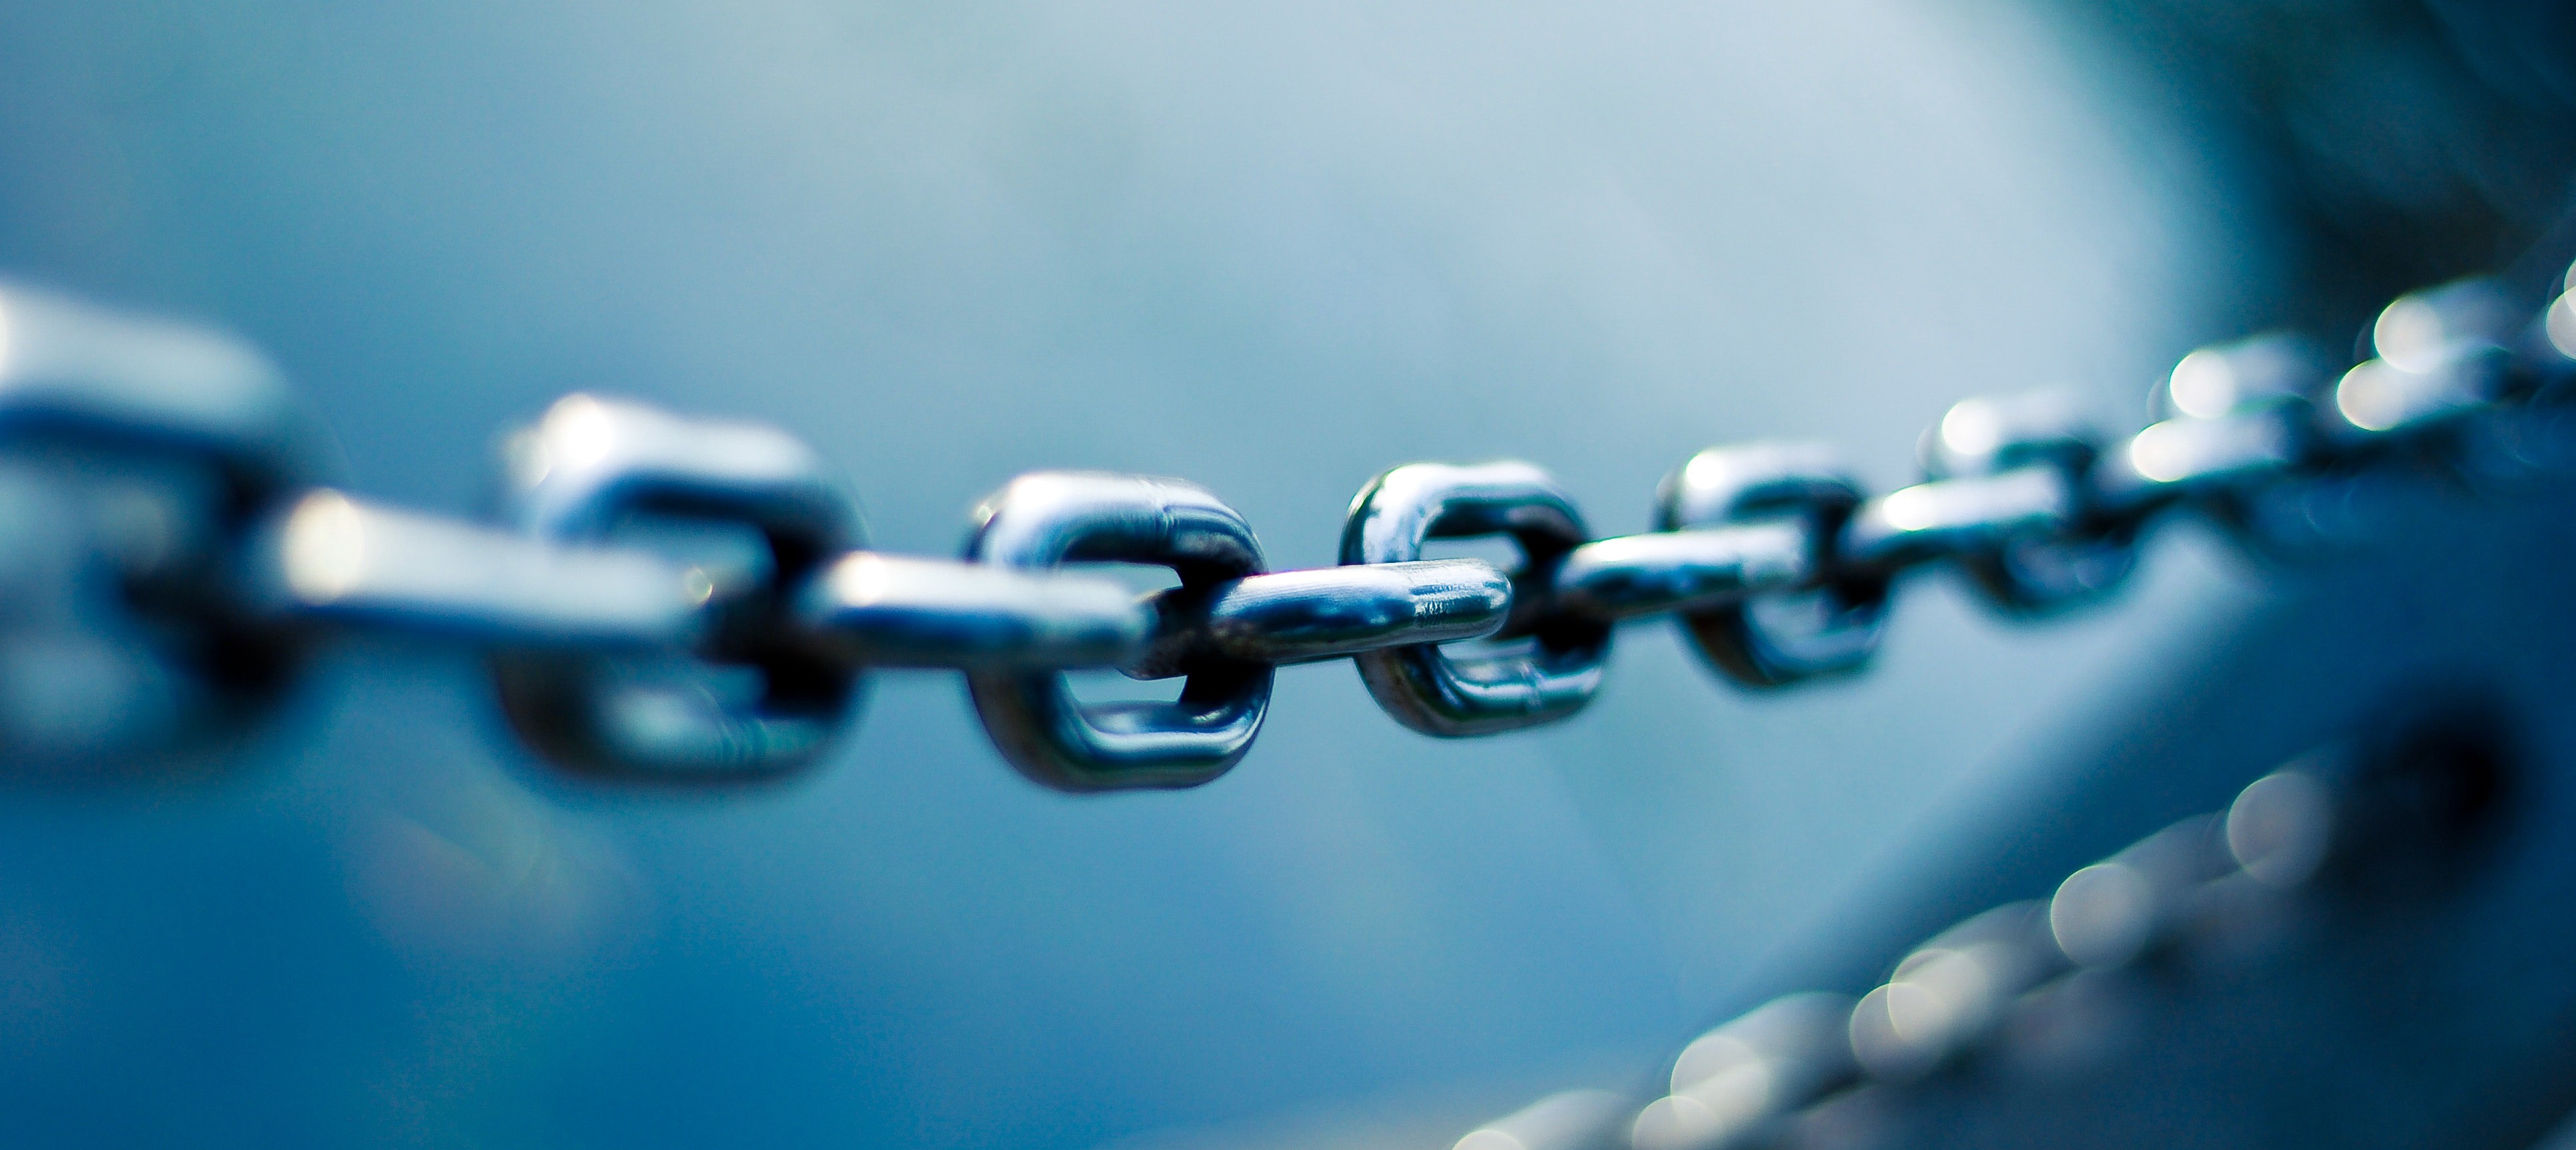 Photograph of a metal chain